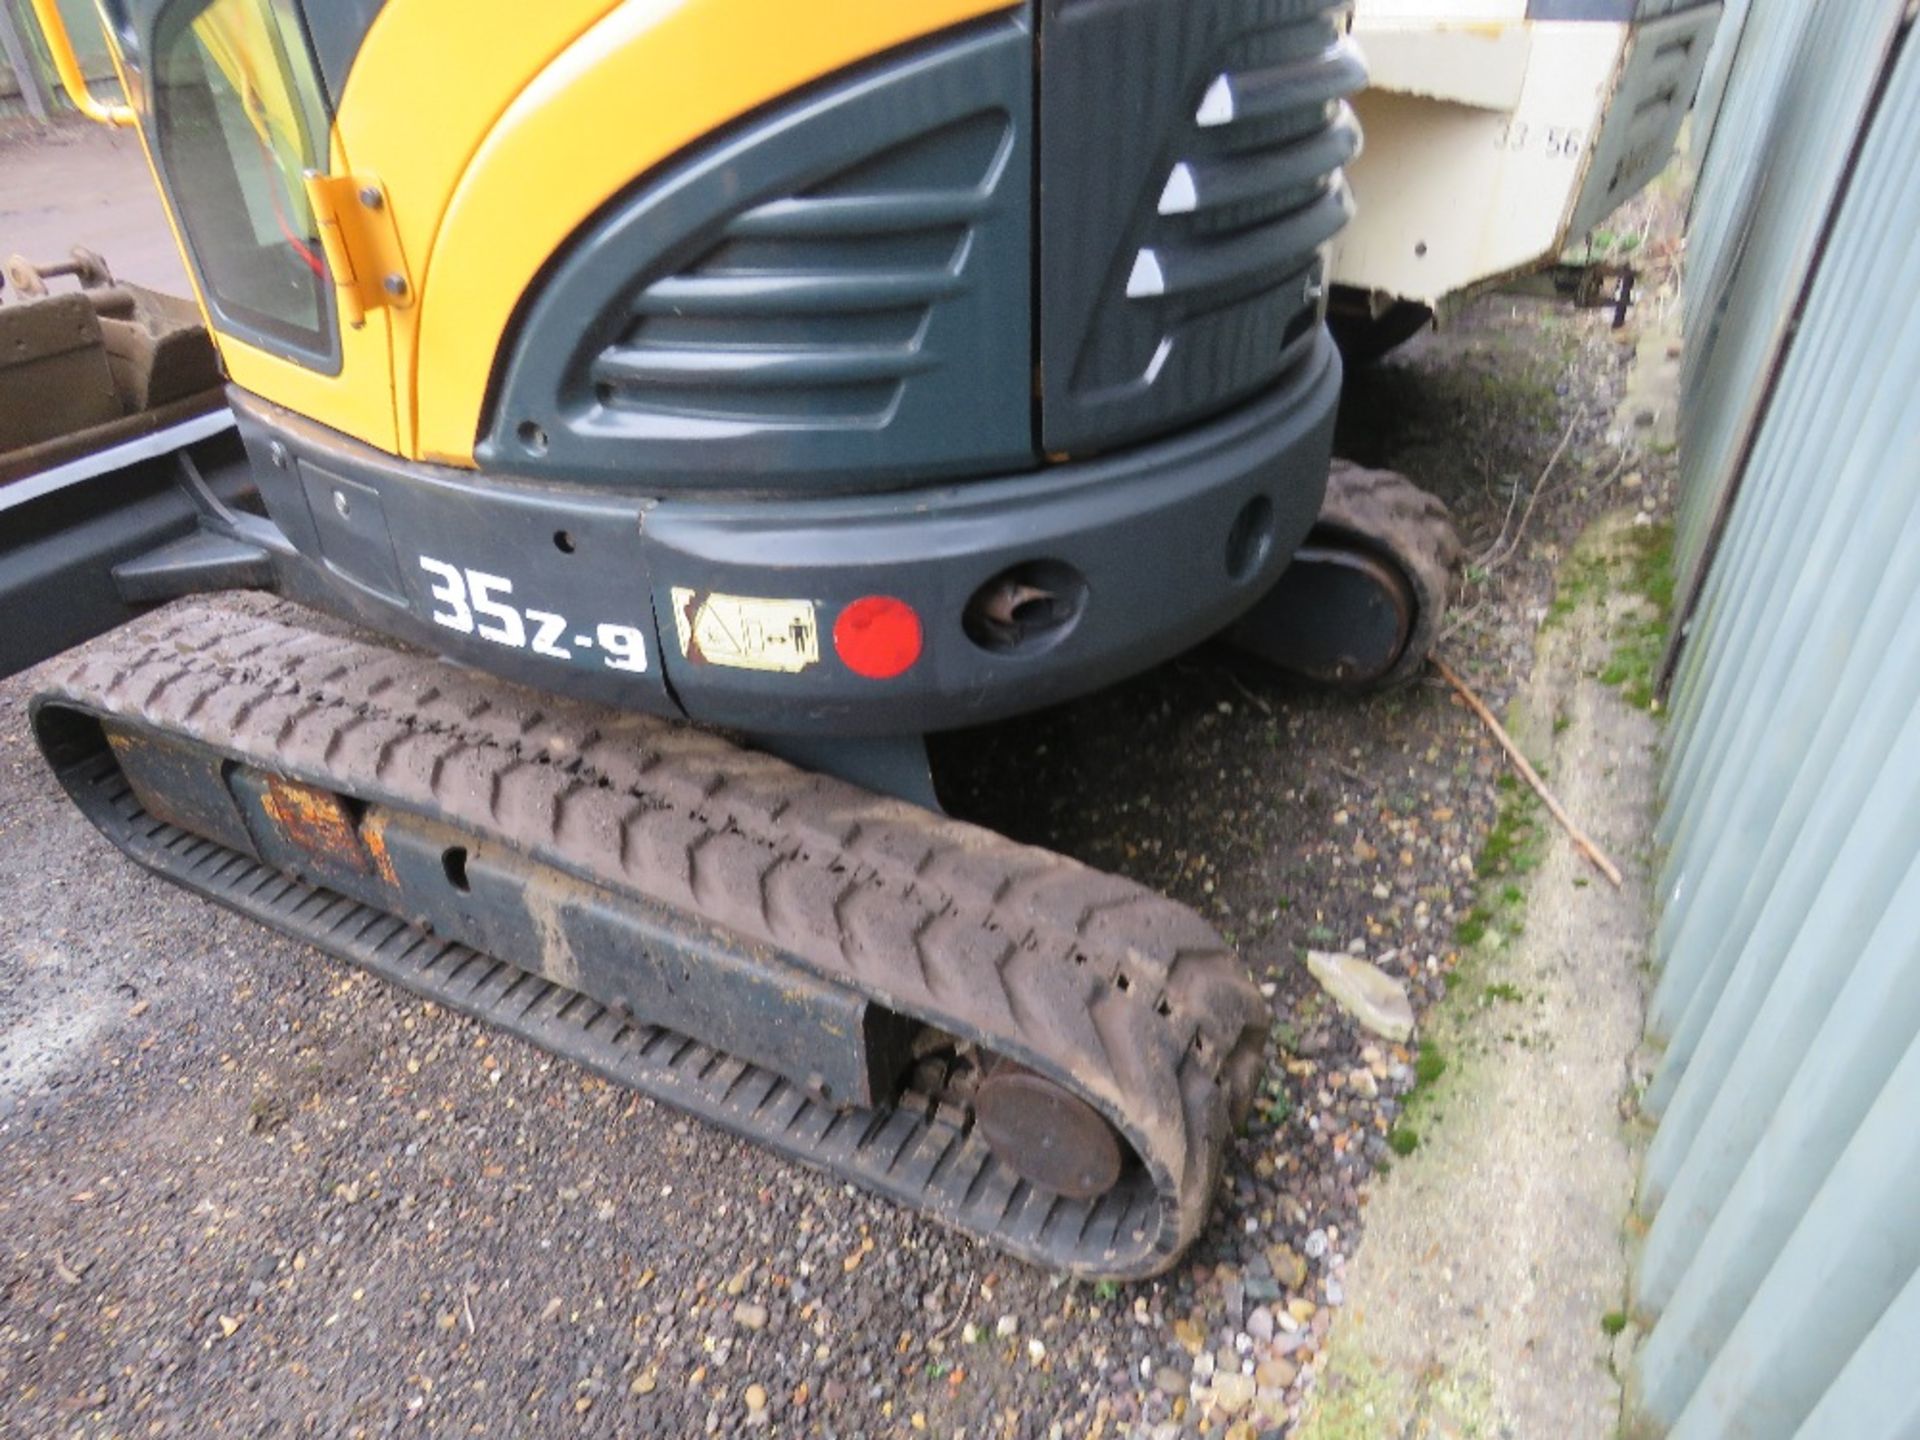 HYUNDAI ROBEX 35Z-9 RUBBER TRACKED EXCAVATOR, YEAR 2013. 4072 REC HOURS. 3NO BUCKETS AS SHOWN. SN:HH - Image 11 of 15